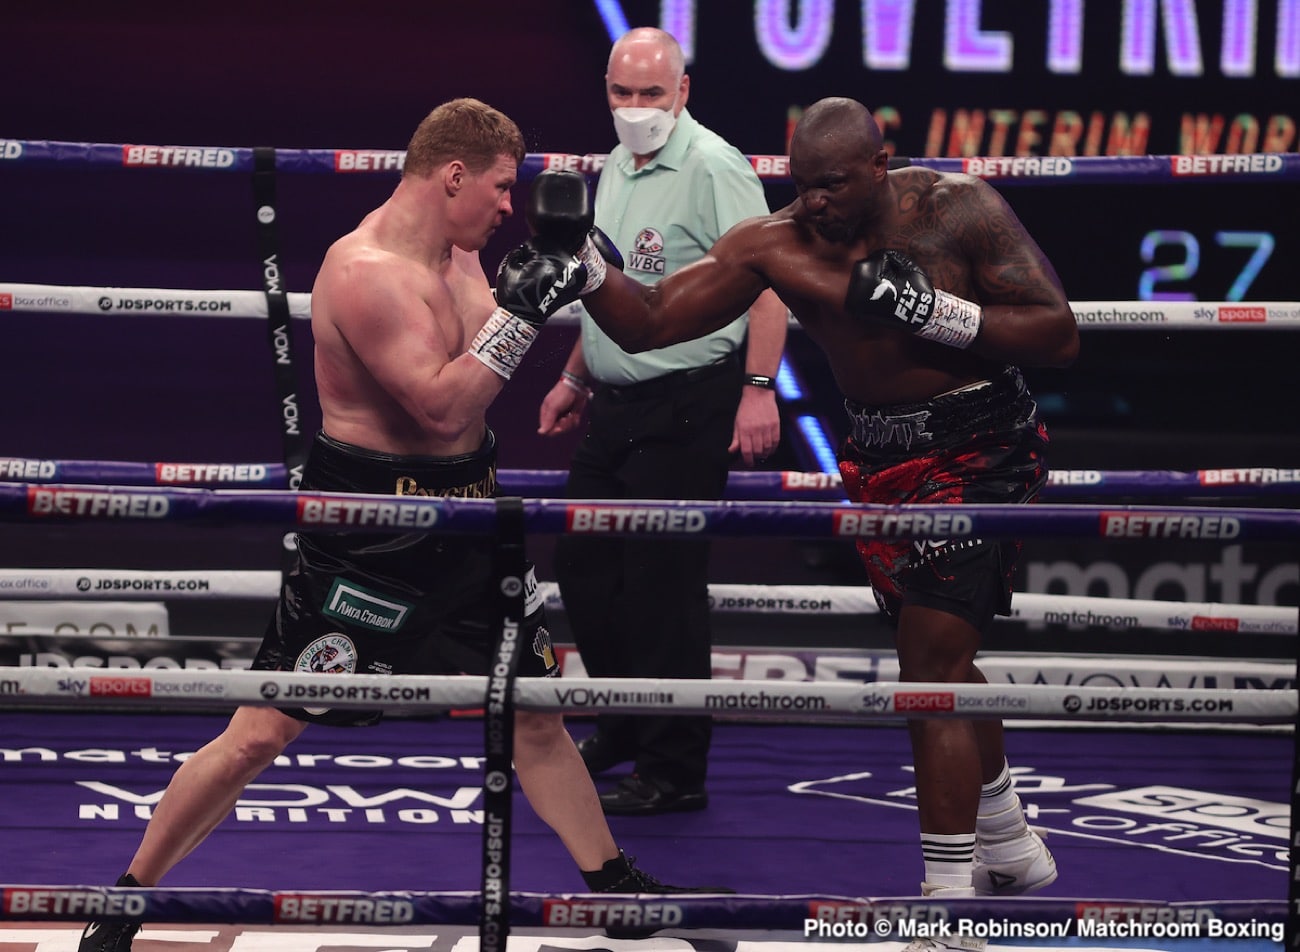 Image: Dillian Whyte calls out Deontay Wilder: "I want to punish the coward"